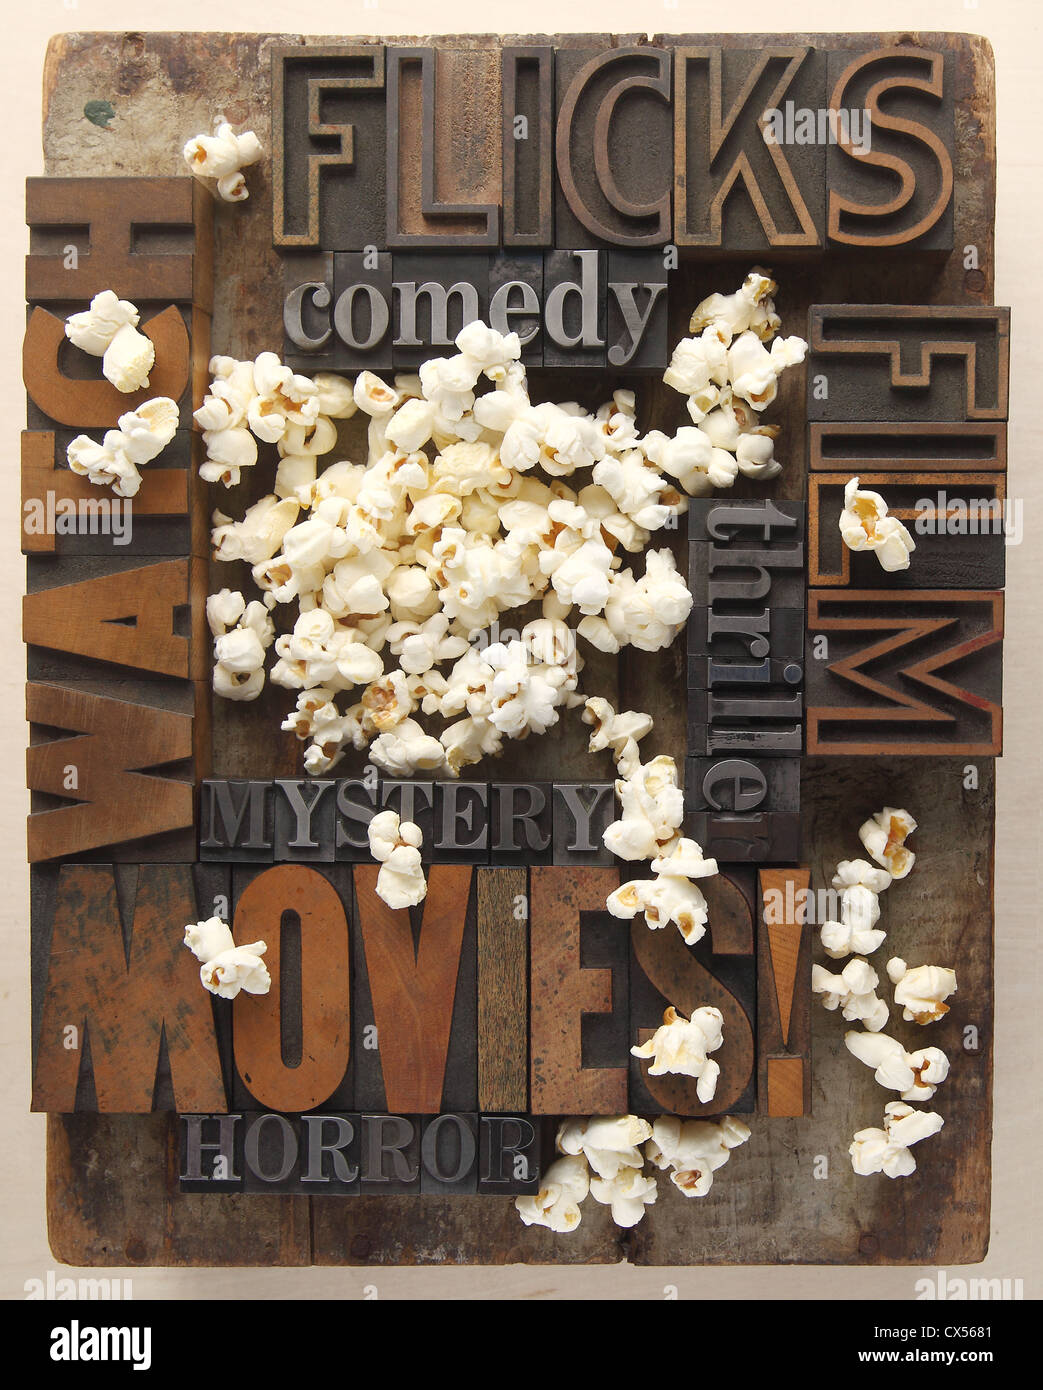 words associated with movie watching in old letterpress wood and metal type with popcorn Stock Photo